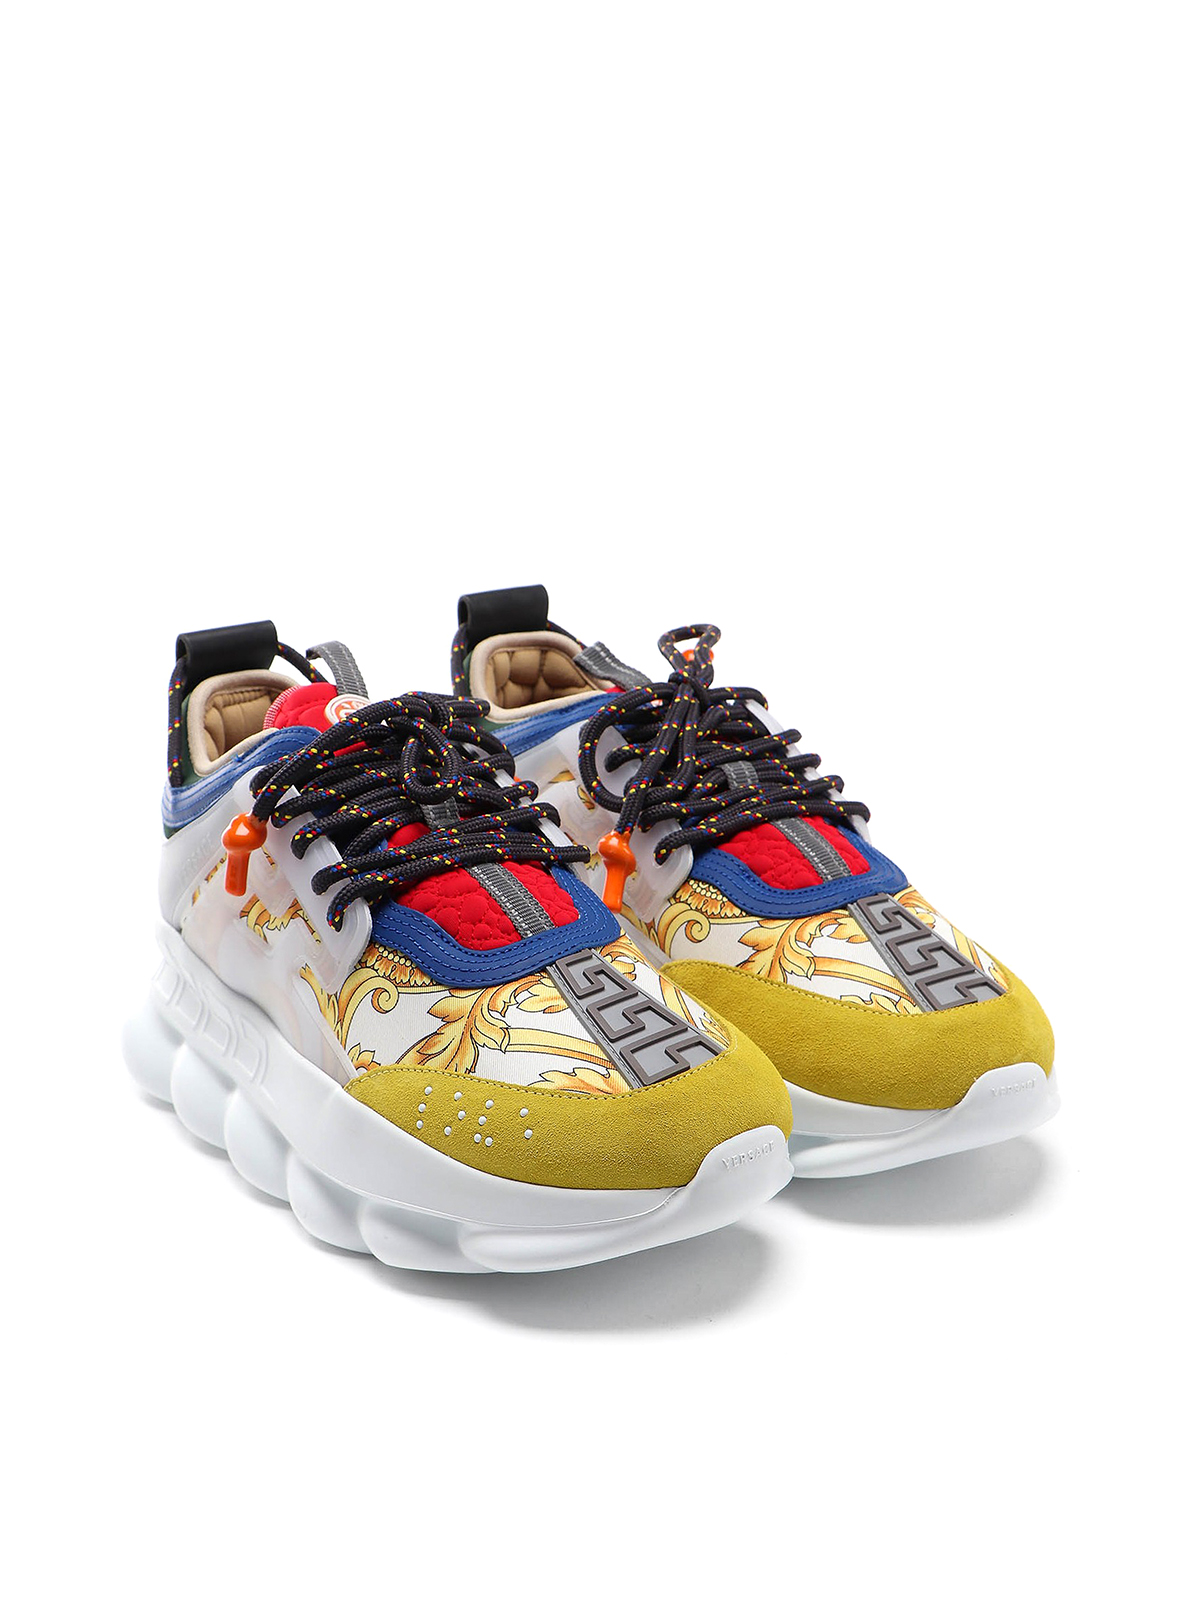 Chain Reaction trainers